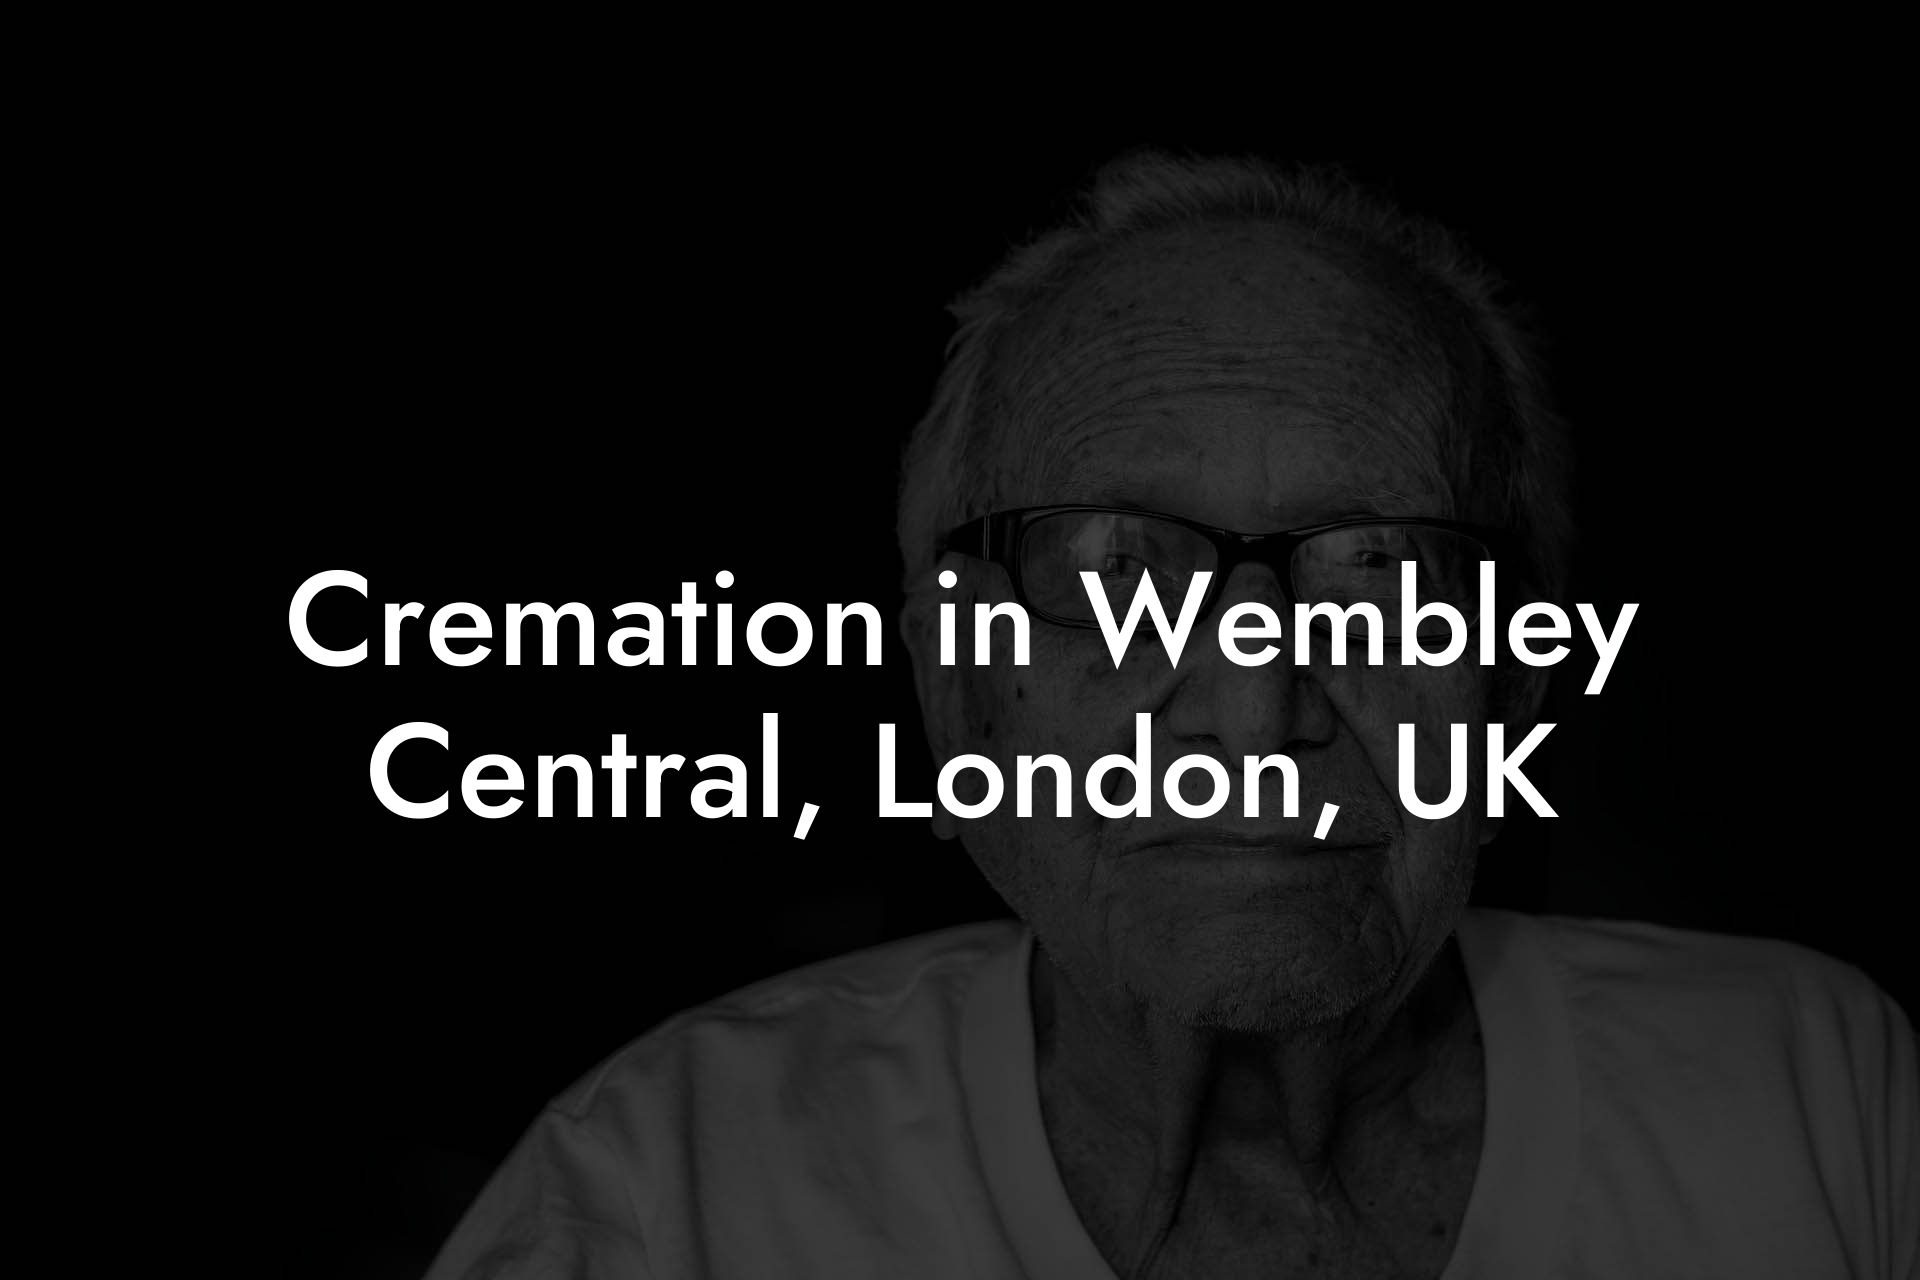 Cremation in Wembley Central, London, UK